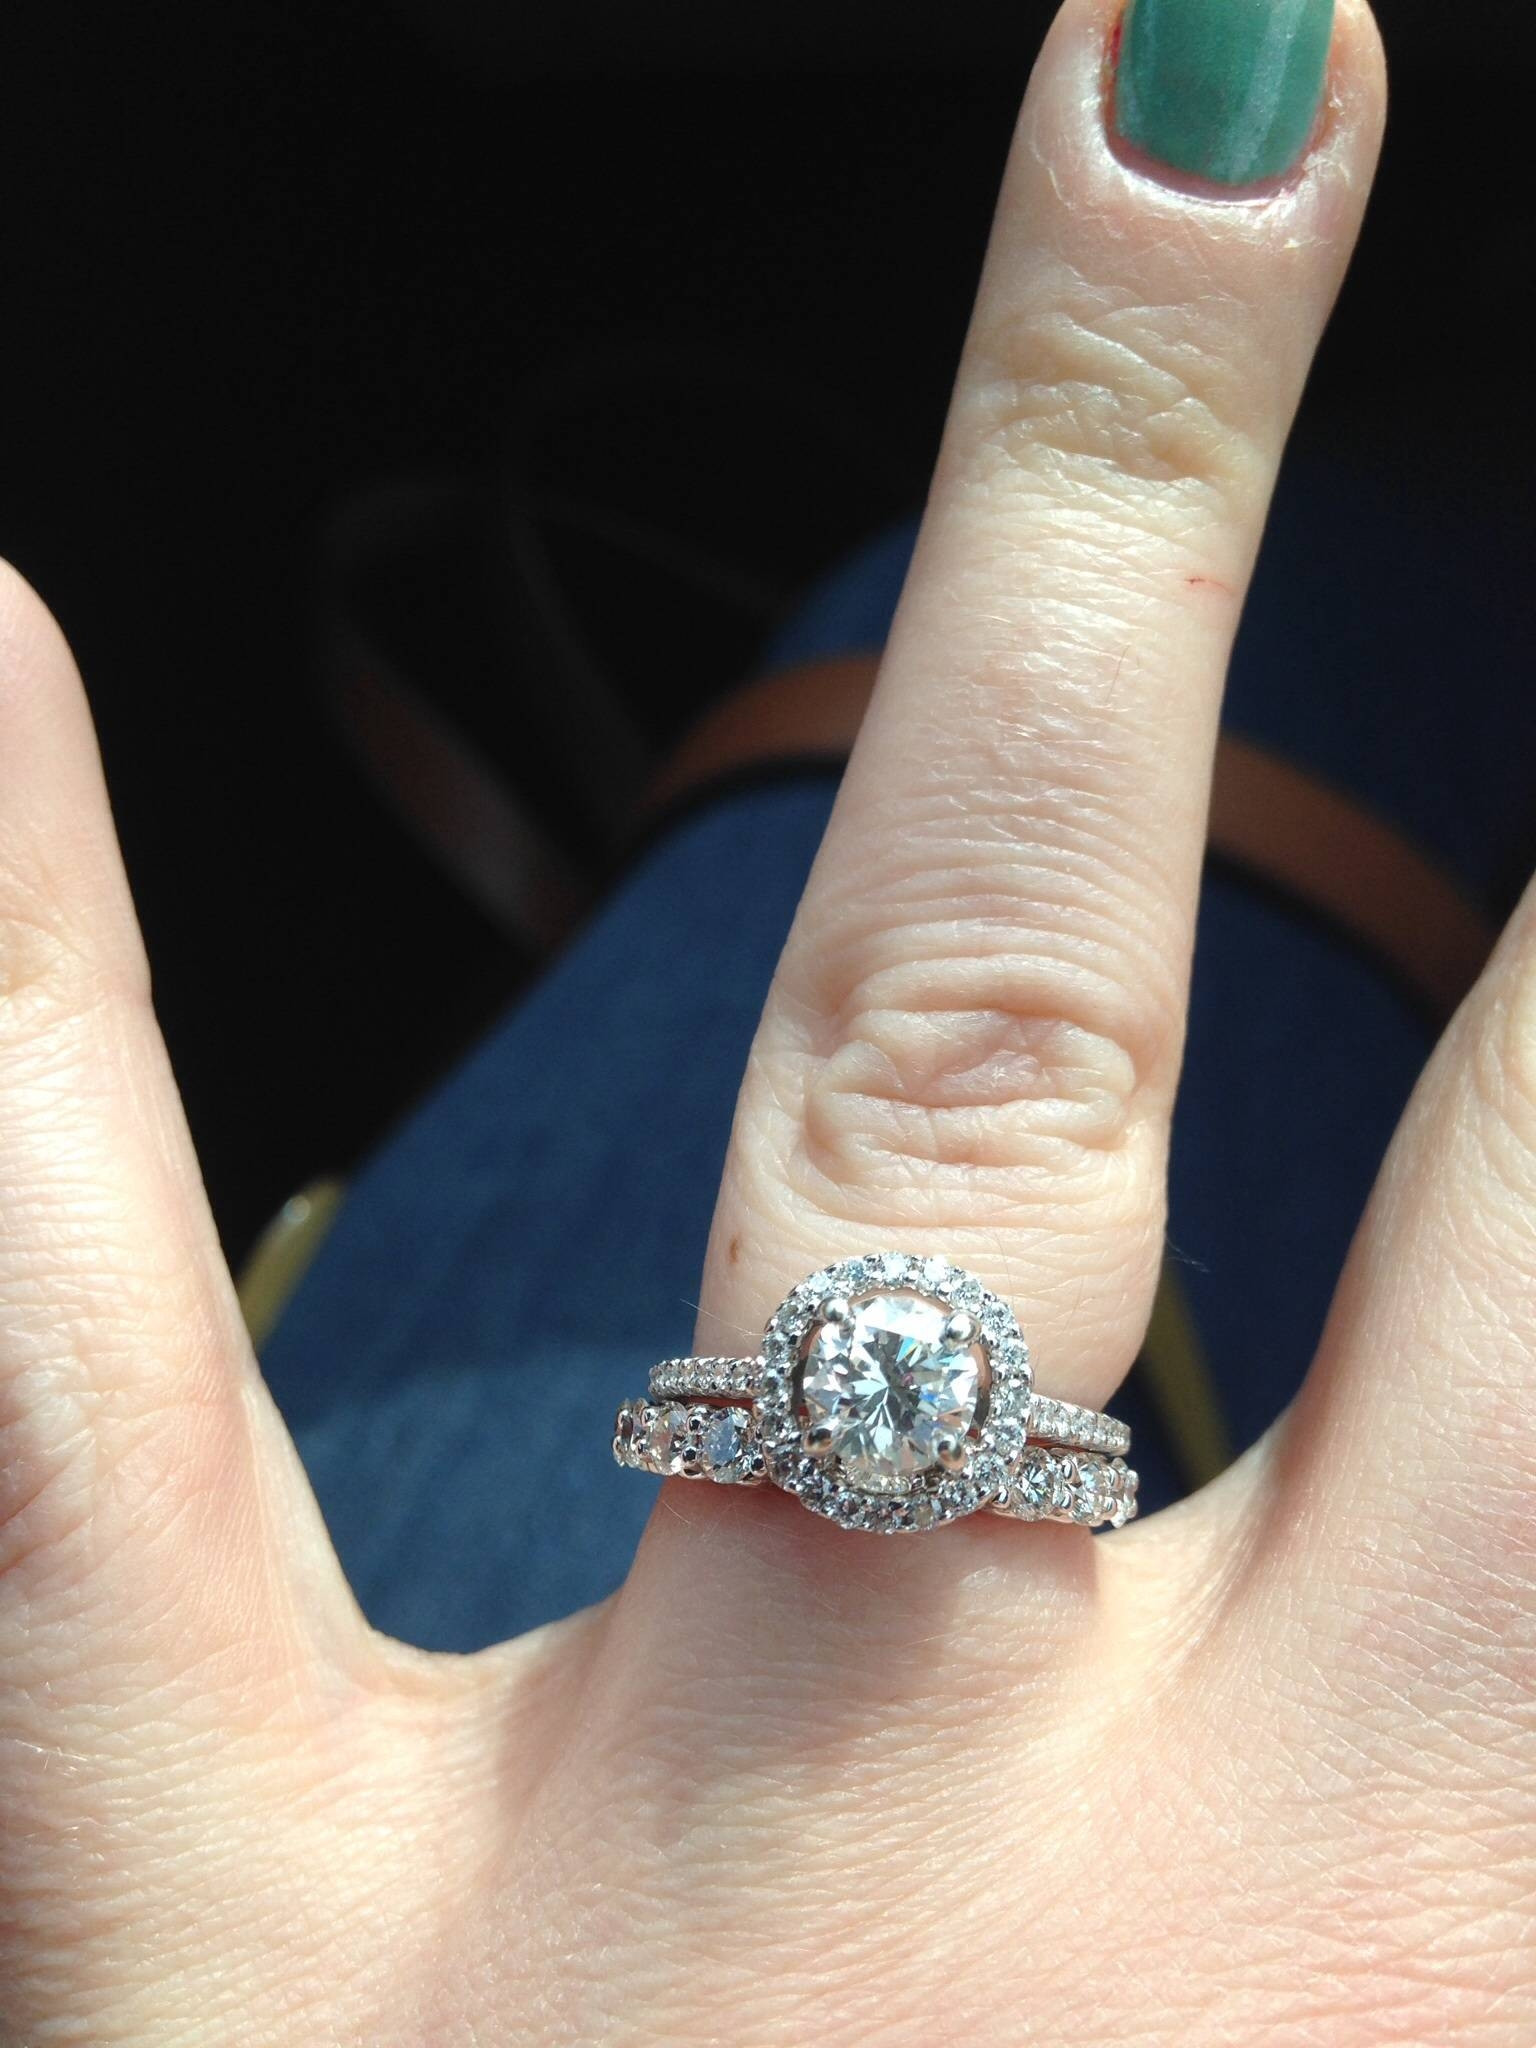 21 Of the Best Ideas for Costco Diamond Rings Reviews - Home, Family ...